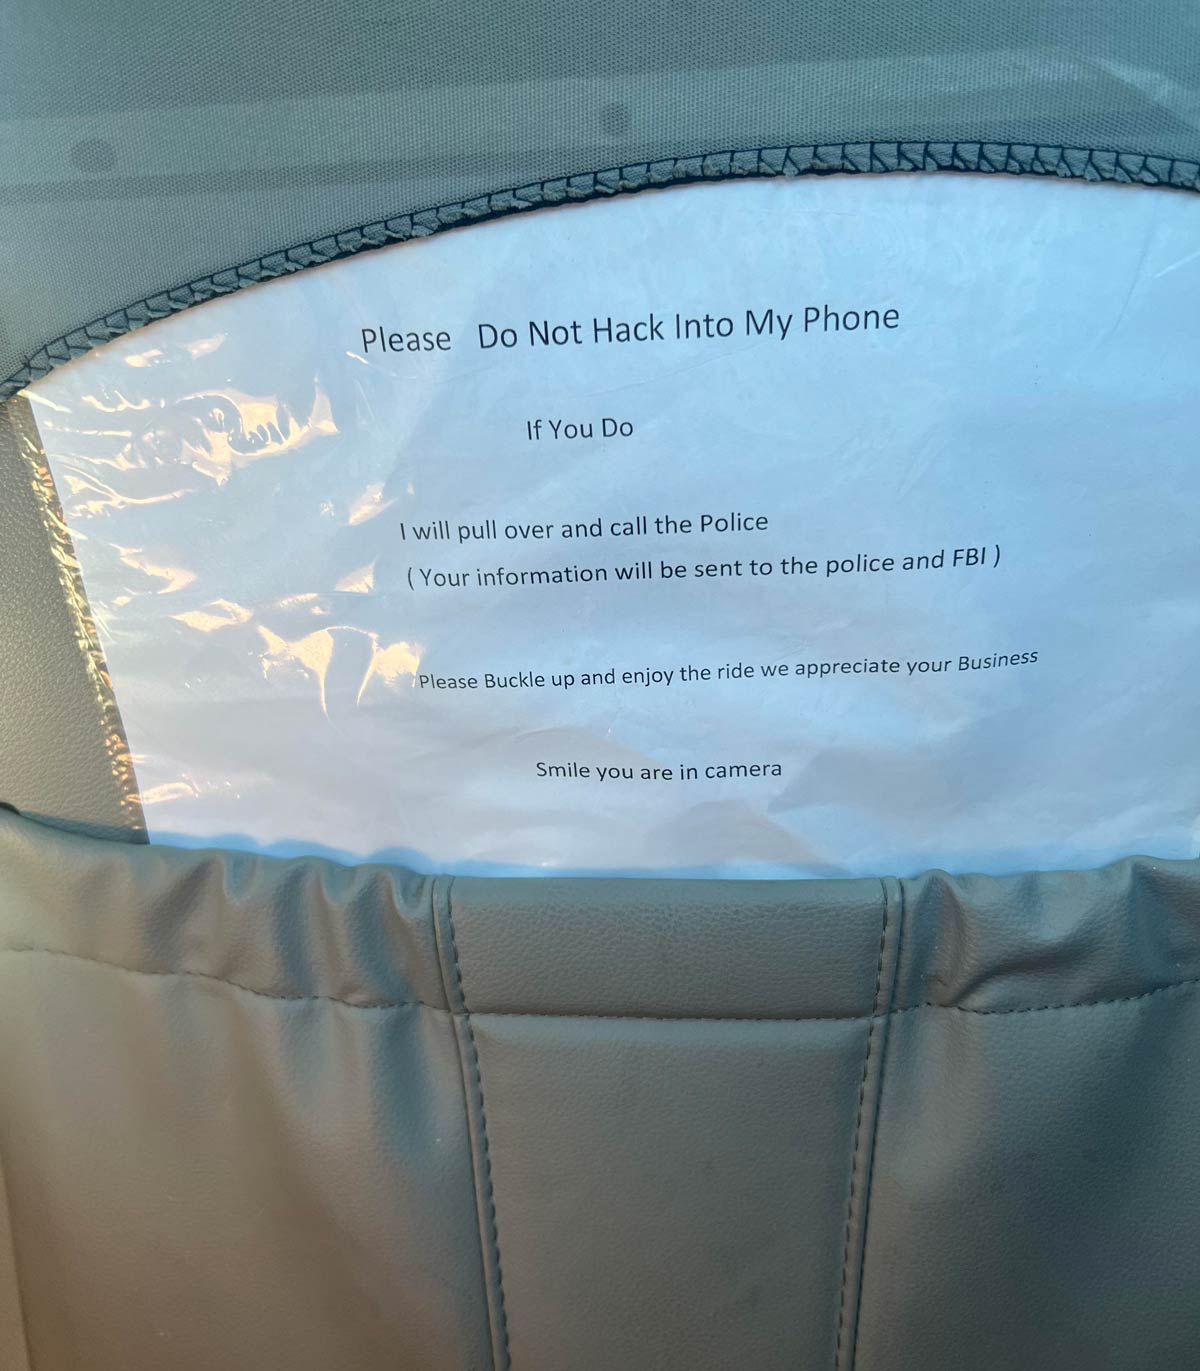 This sign in my Uber in Houston this weekend